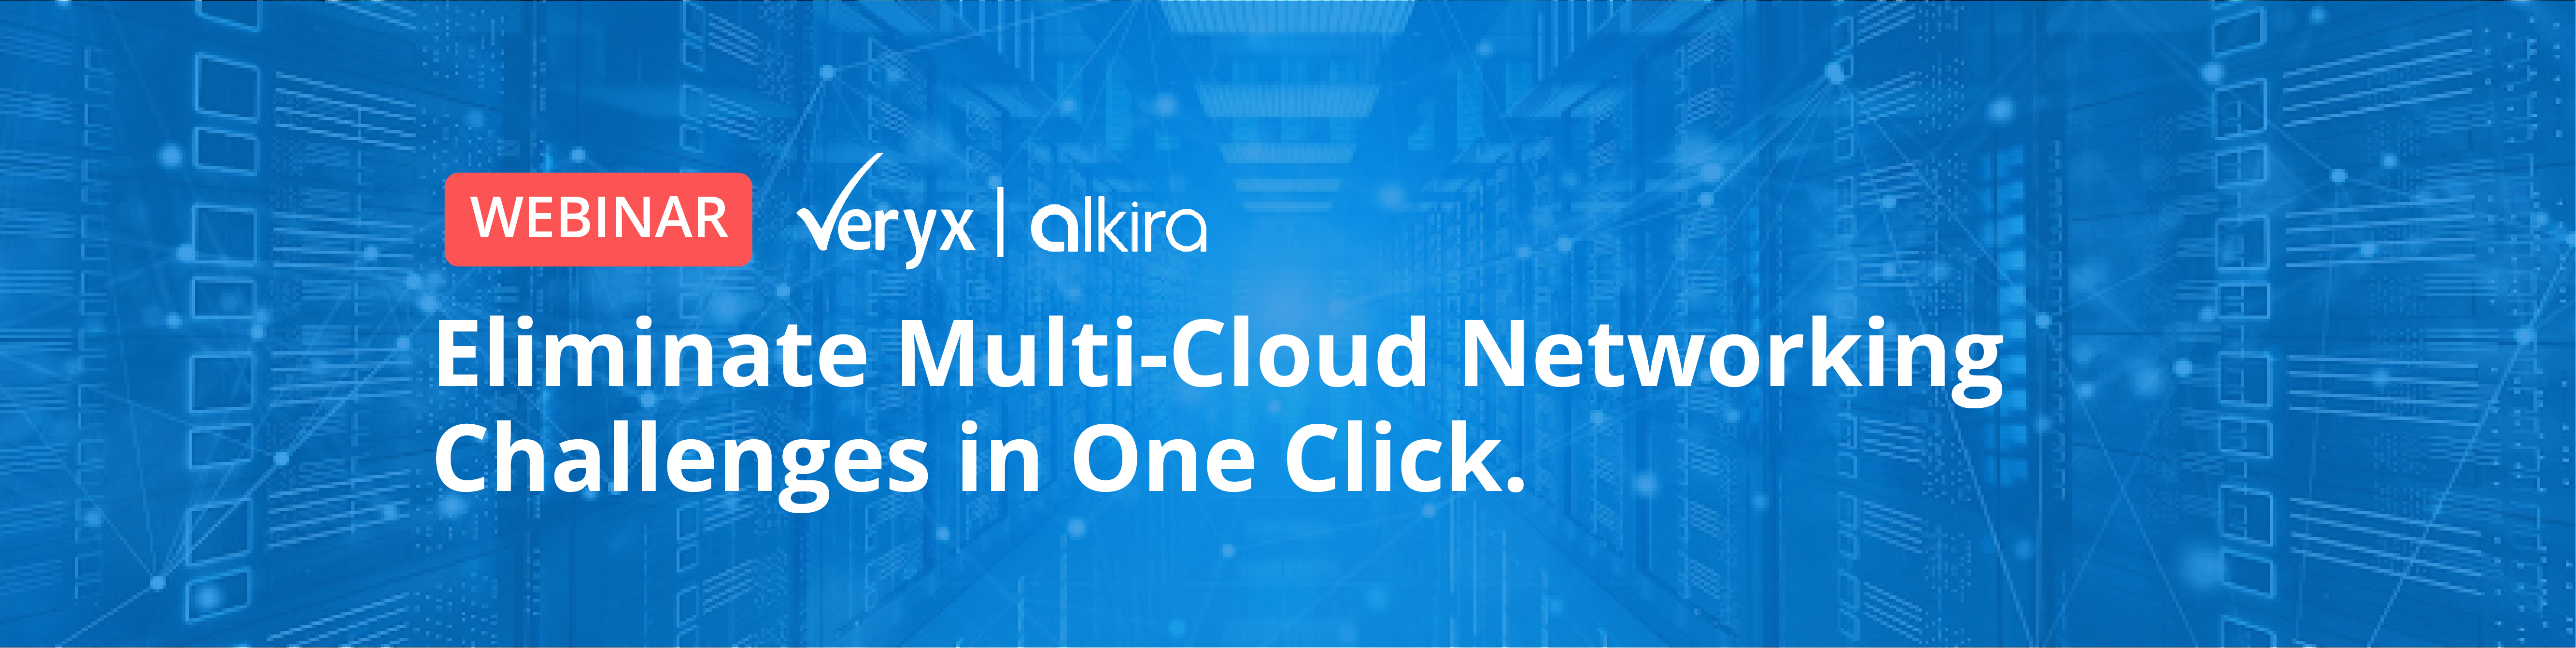 Webinar: Eliminate Multi-Cloud Networking Challenges in One Click